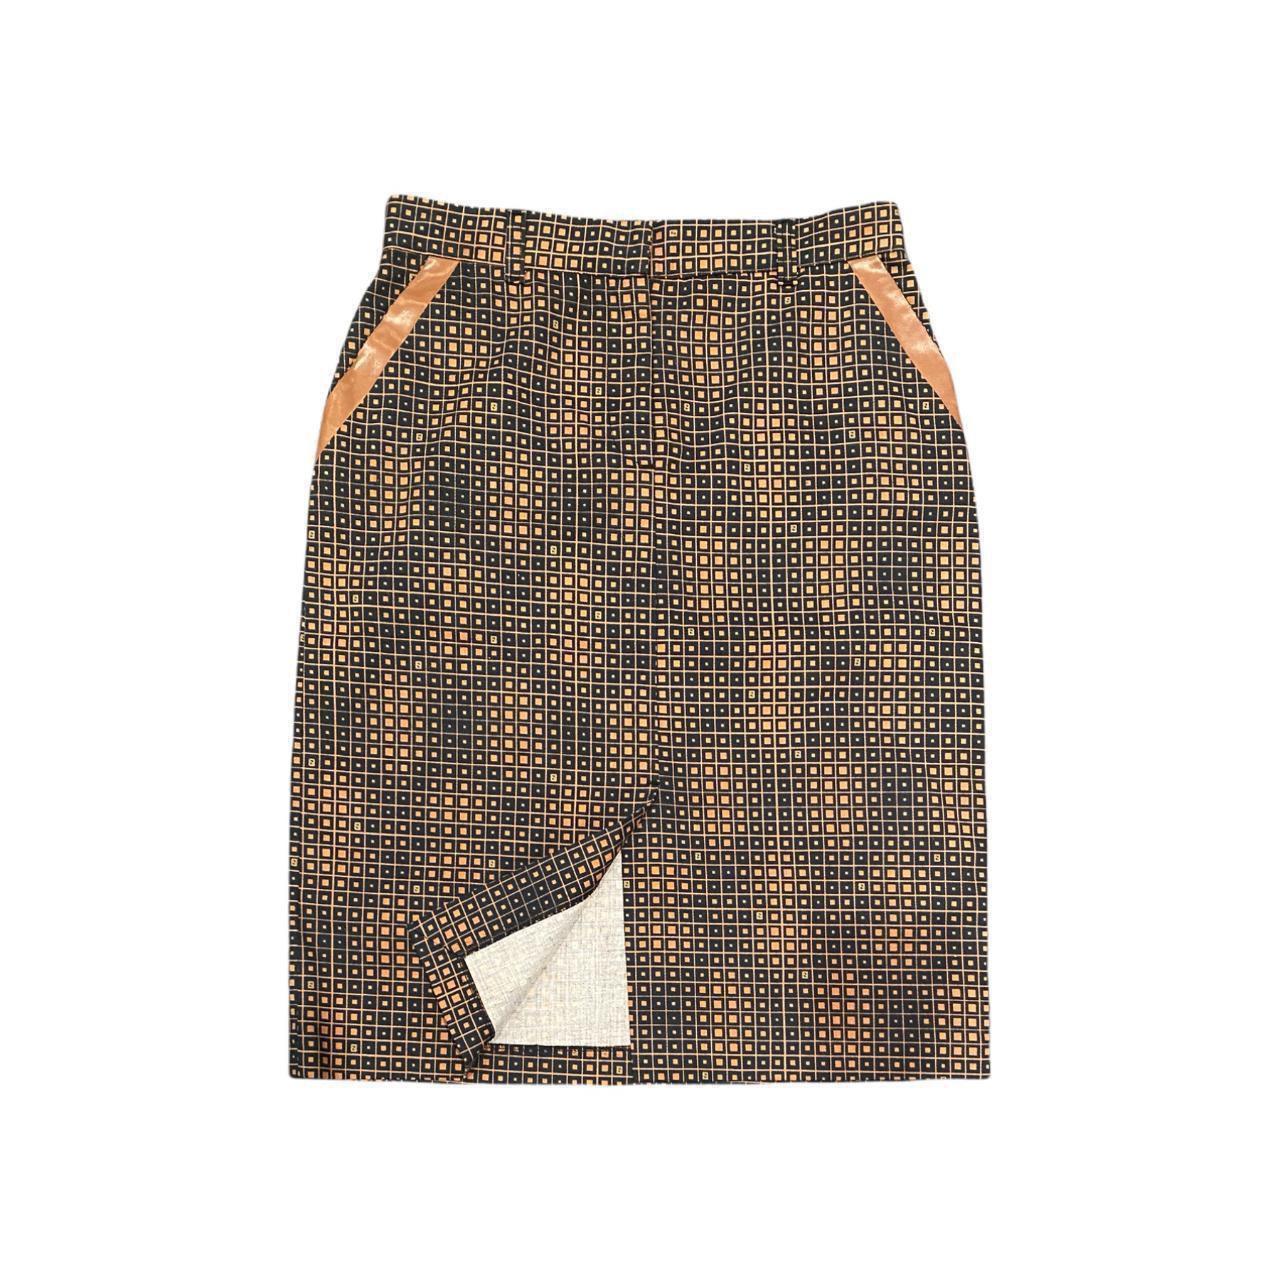 Fendi Monogram Skirt

CONDITION: This item is a vintage/pre-worn piece so some signs of natural wear and age are to be expected. However good general condition.

SIZE LABELLED: IT 44 (L)

ACTUAL MEASUREMENTS: Waist: 29